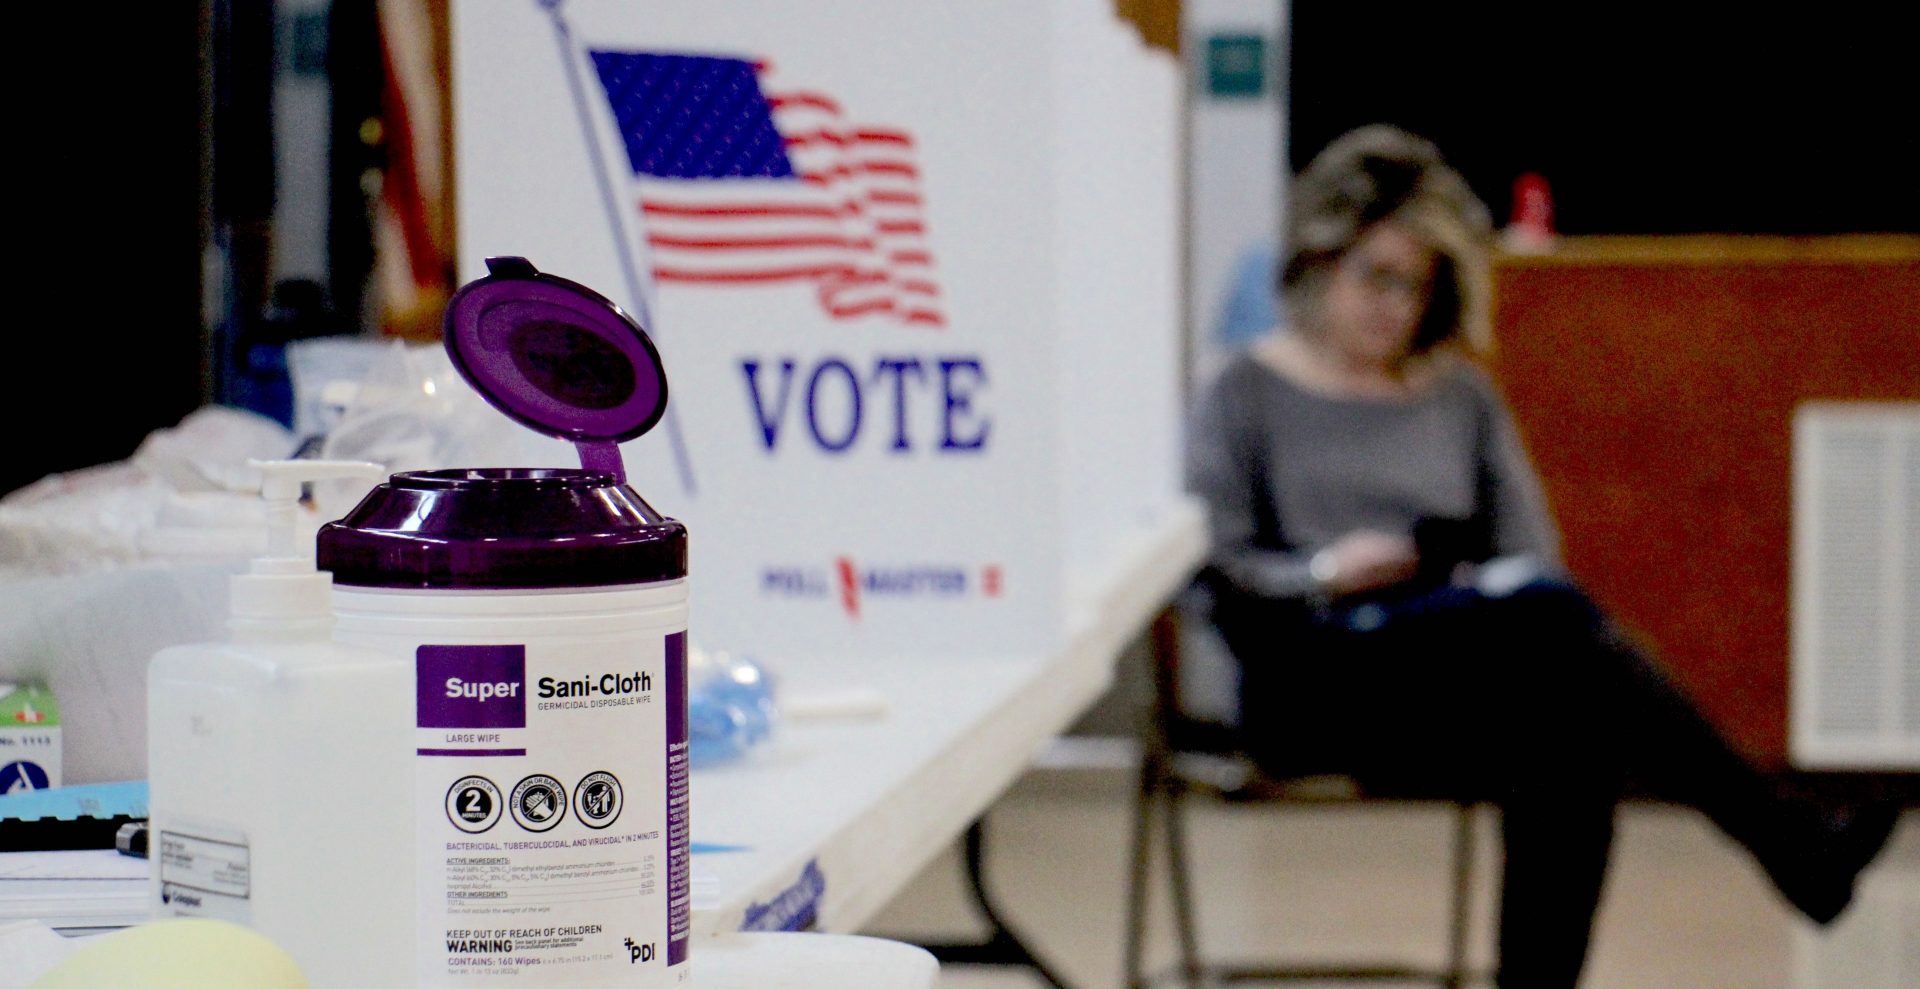 Poll worker Dina Sebold waits for voters at Cecelia Snyder Middle School in Bensalem during a special election for a vacant seat in the Pennsylvania House of Representatives. Hand sanitizer and wipes were made available to voters, many of whom brought their own pens.